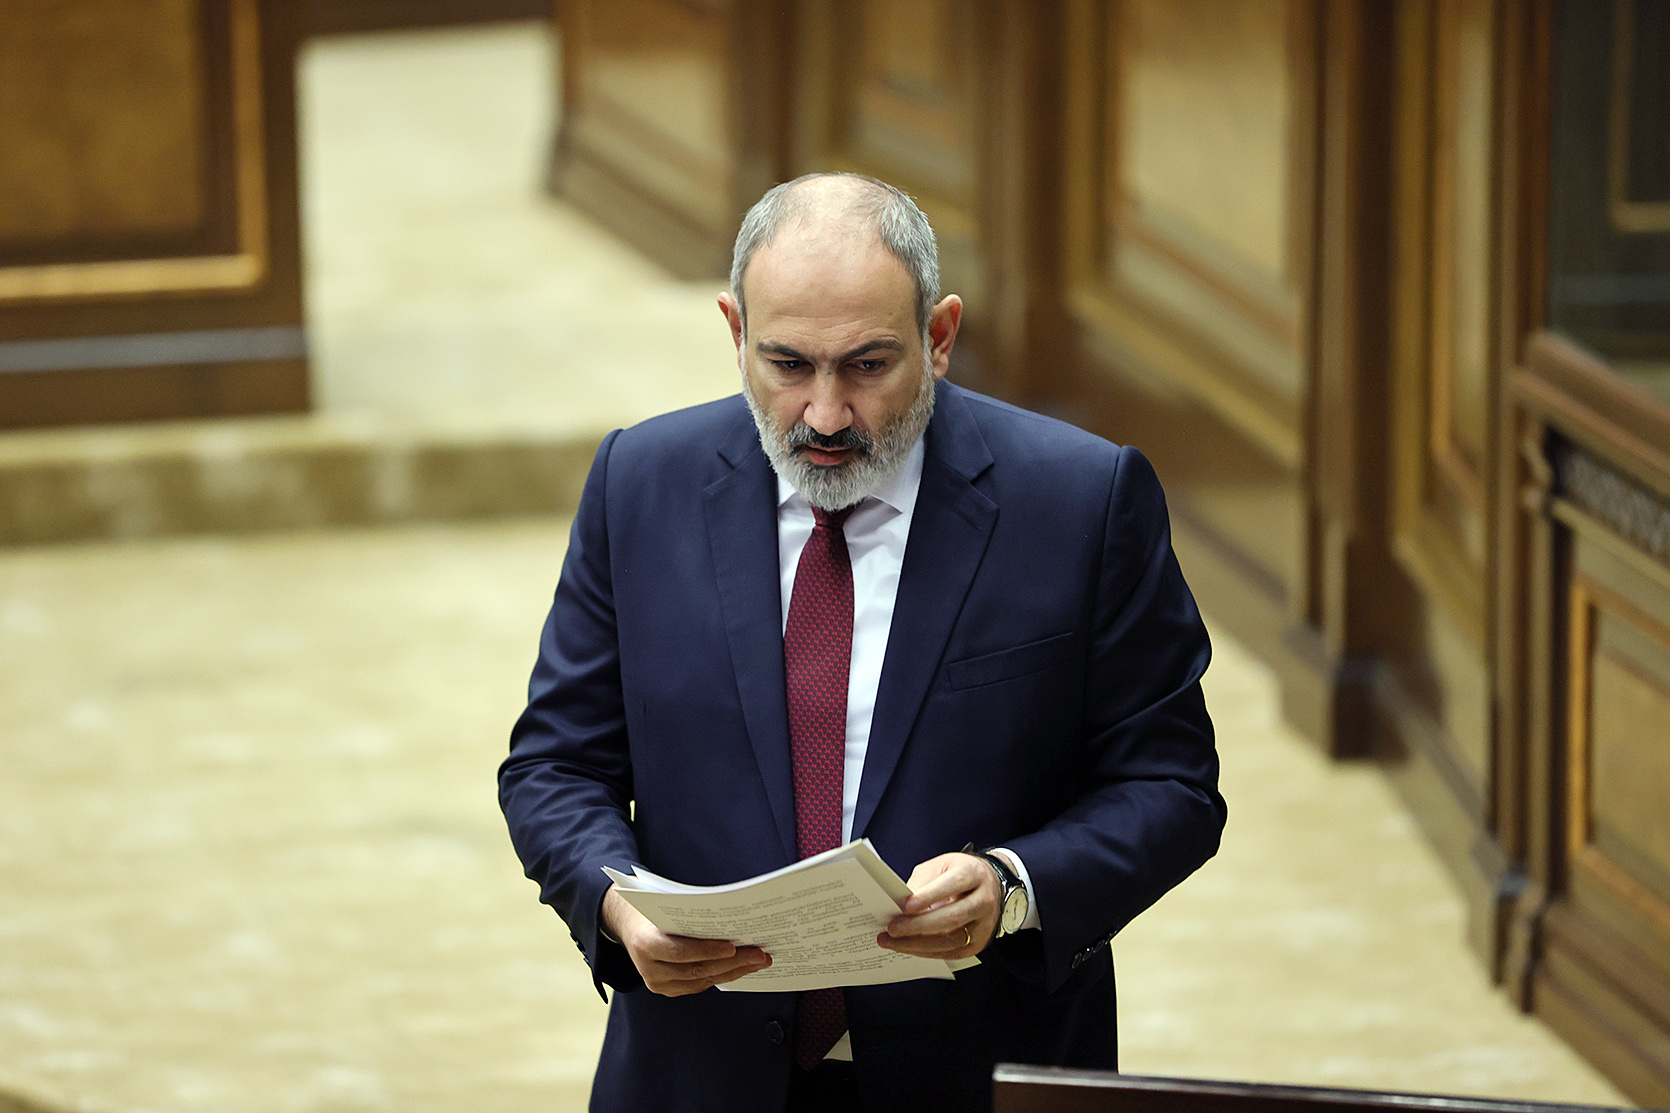 Pashinyan on the justice system in Armenia